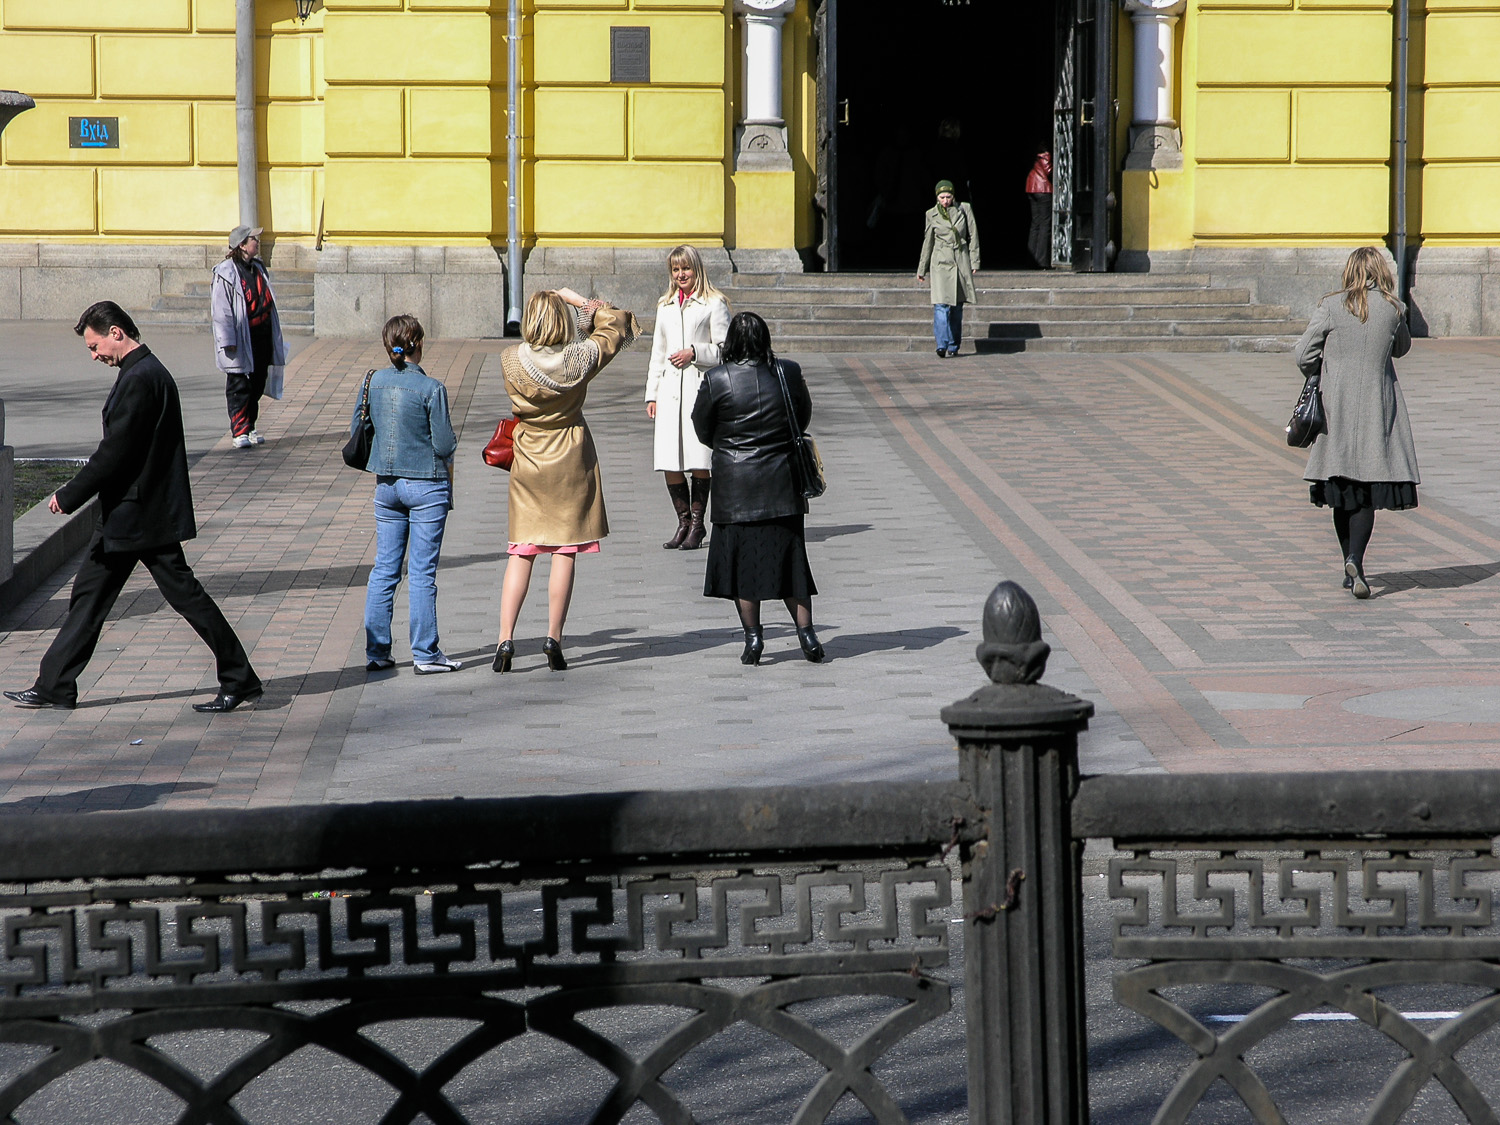  A street scene in front of St Volodymyr's Cathedral in Kyiv. 